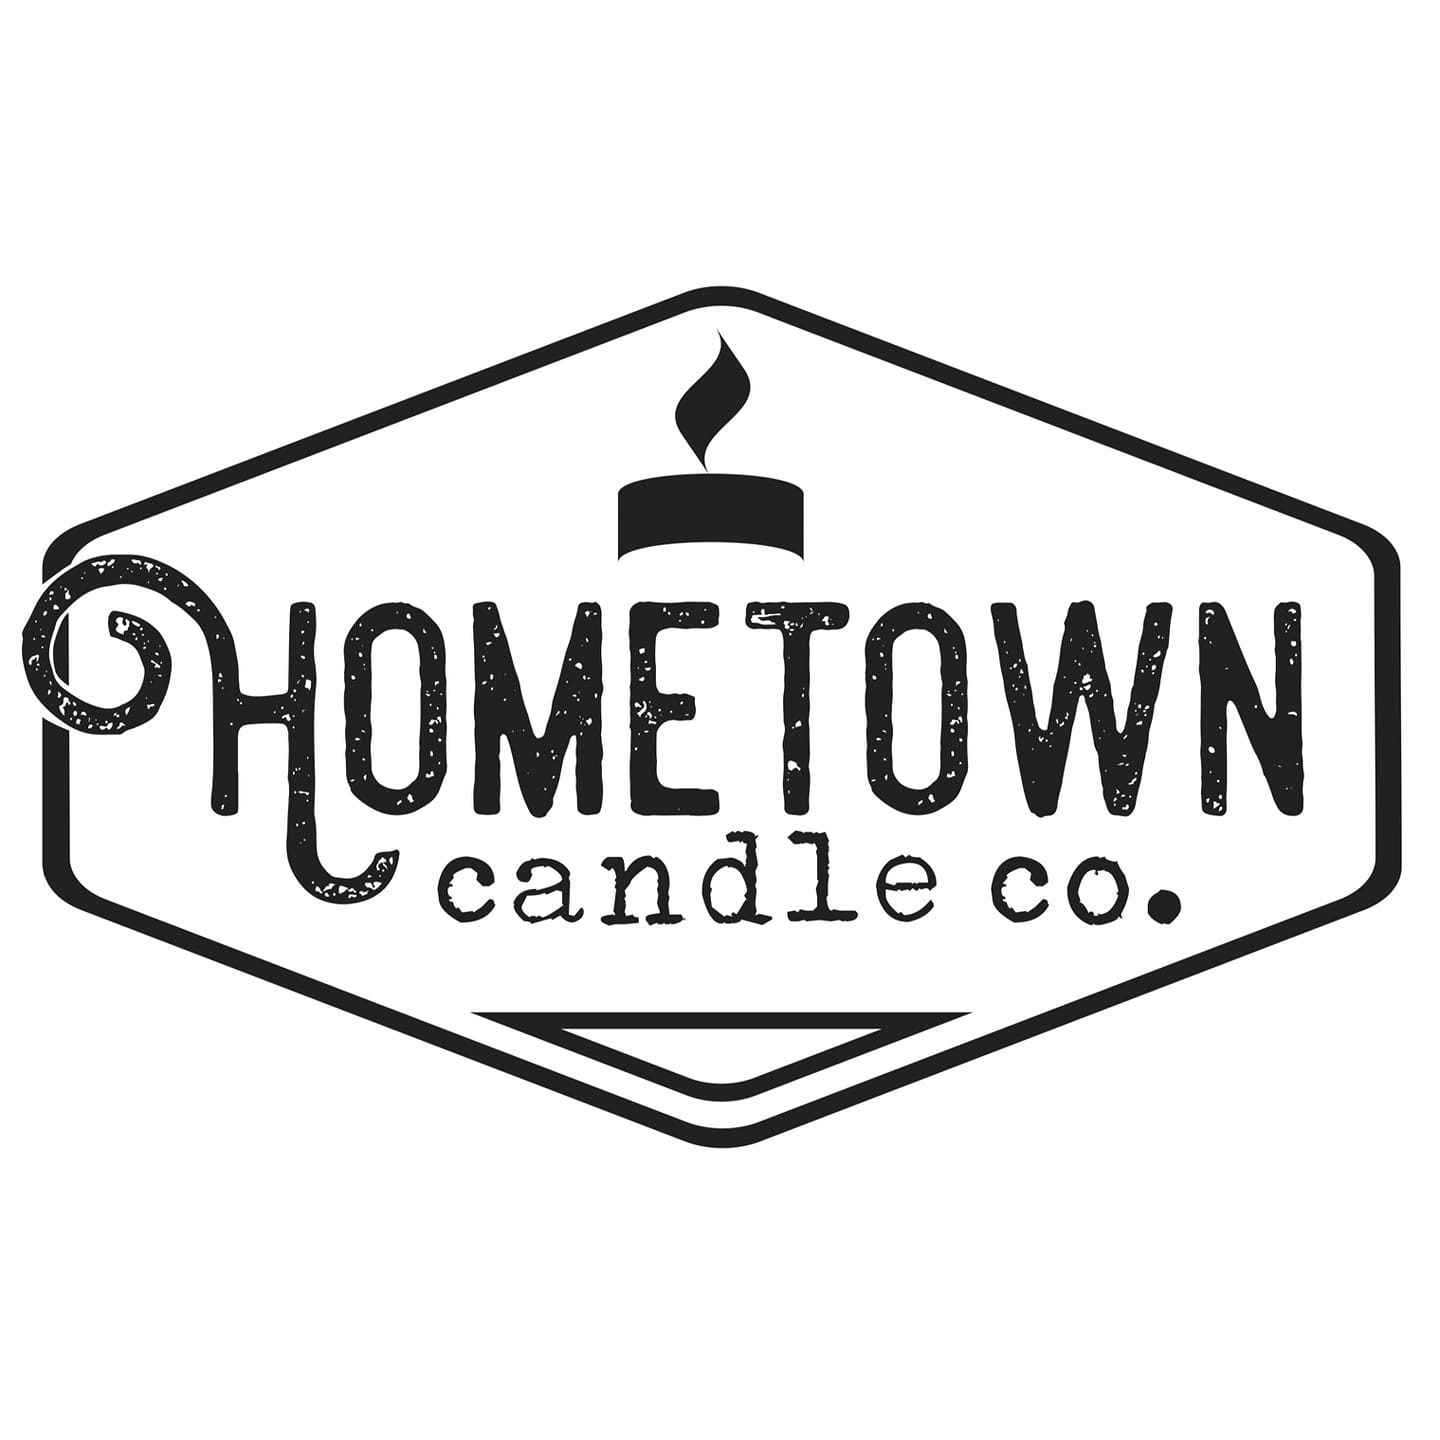 Hometown Candle Company